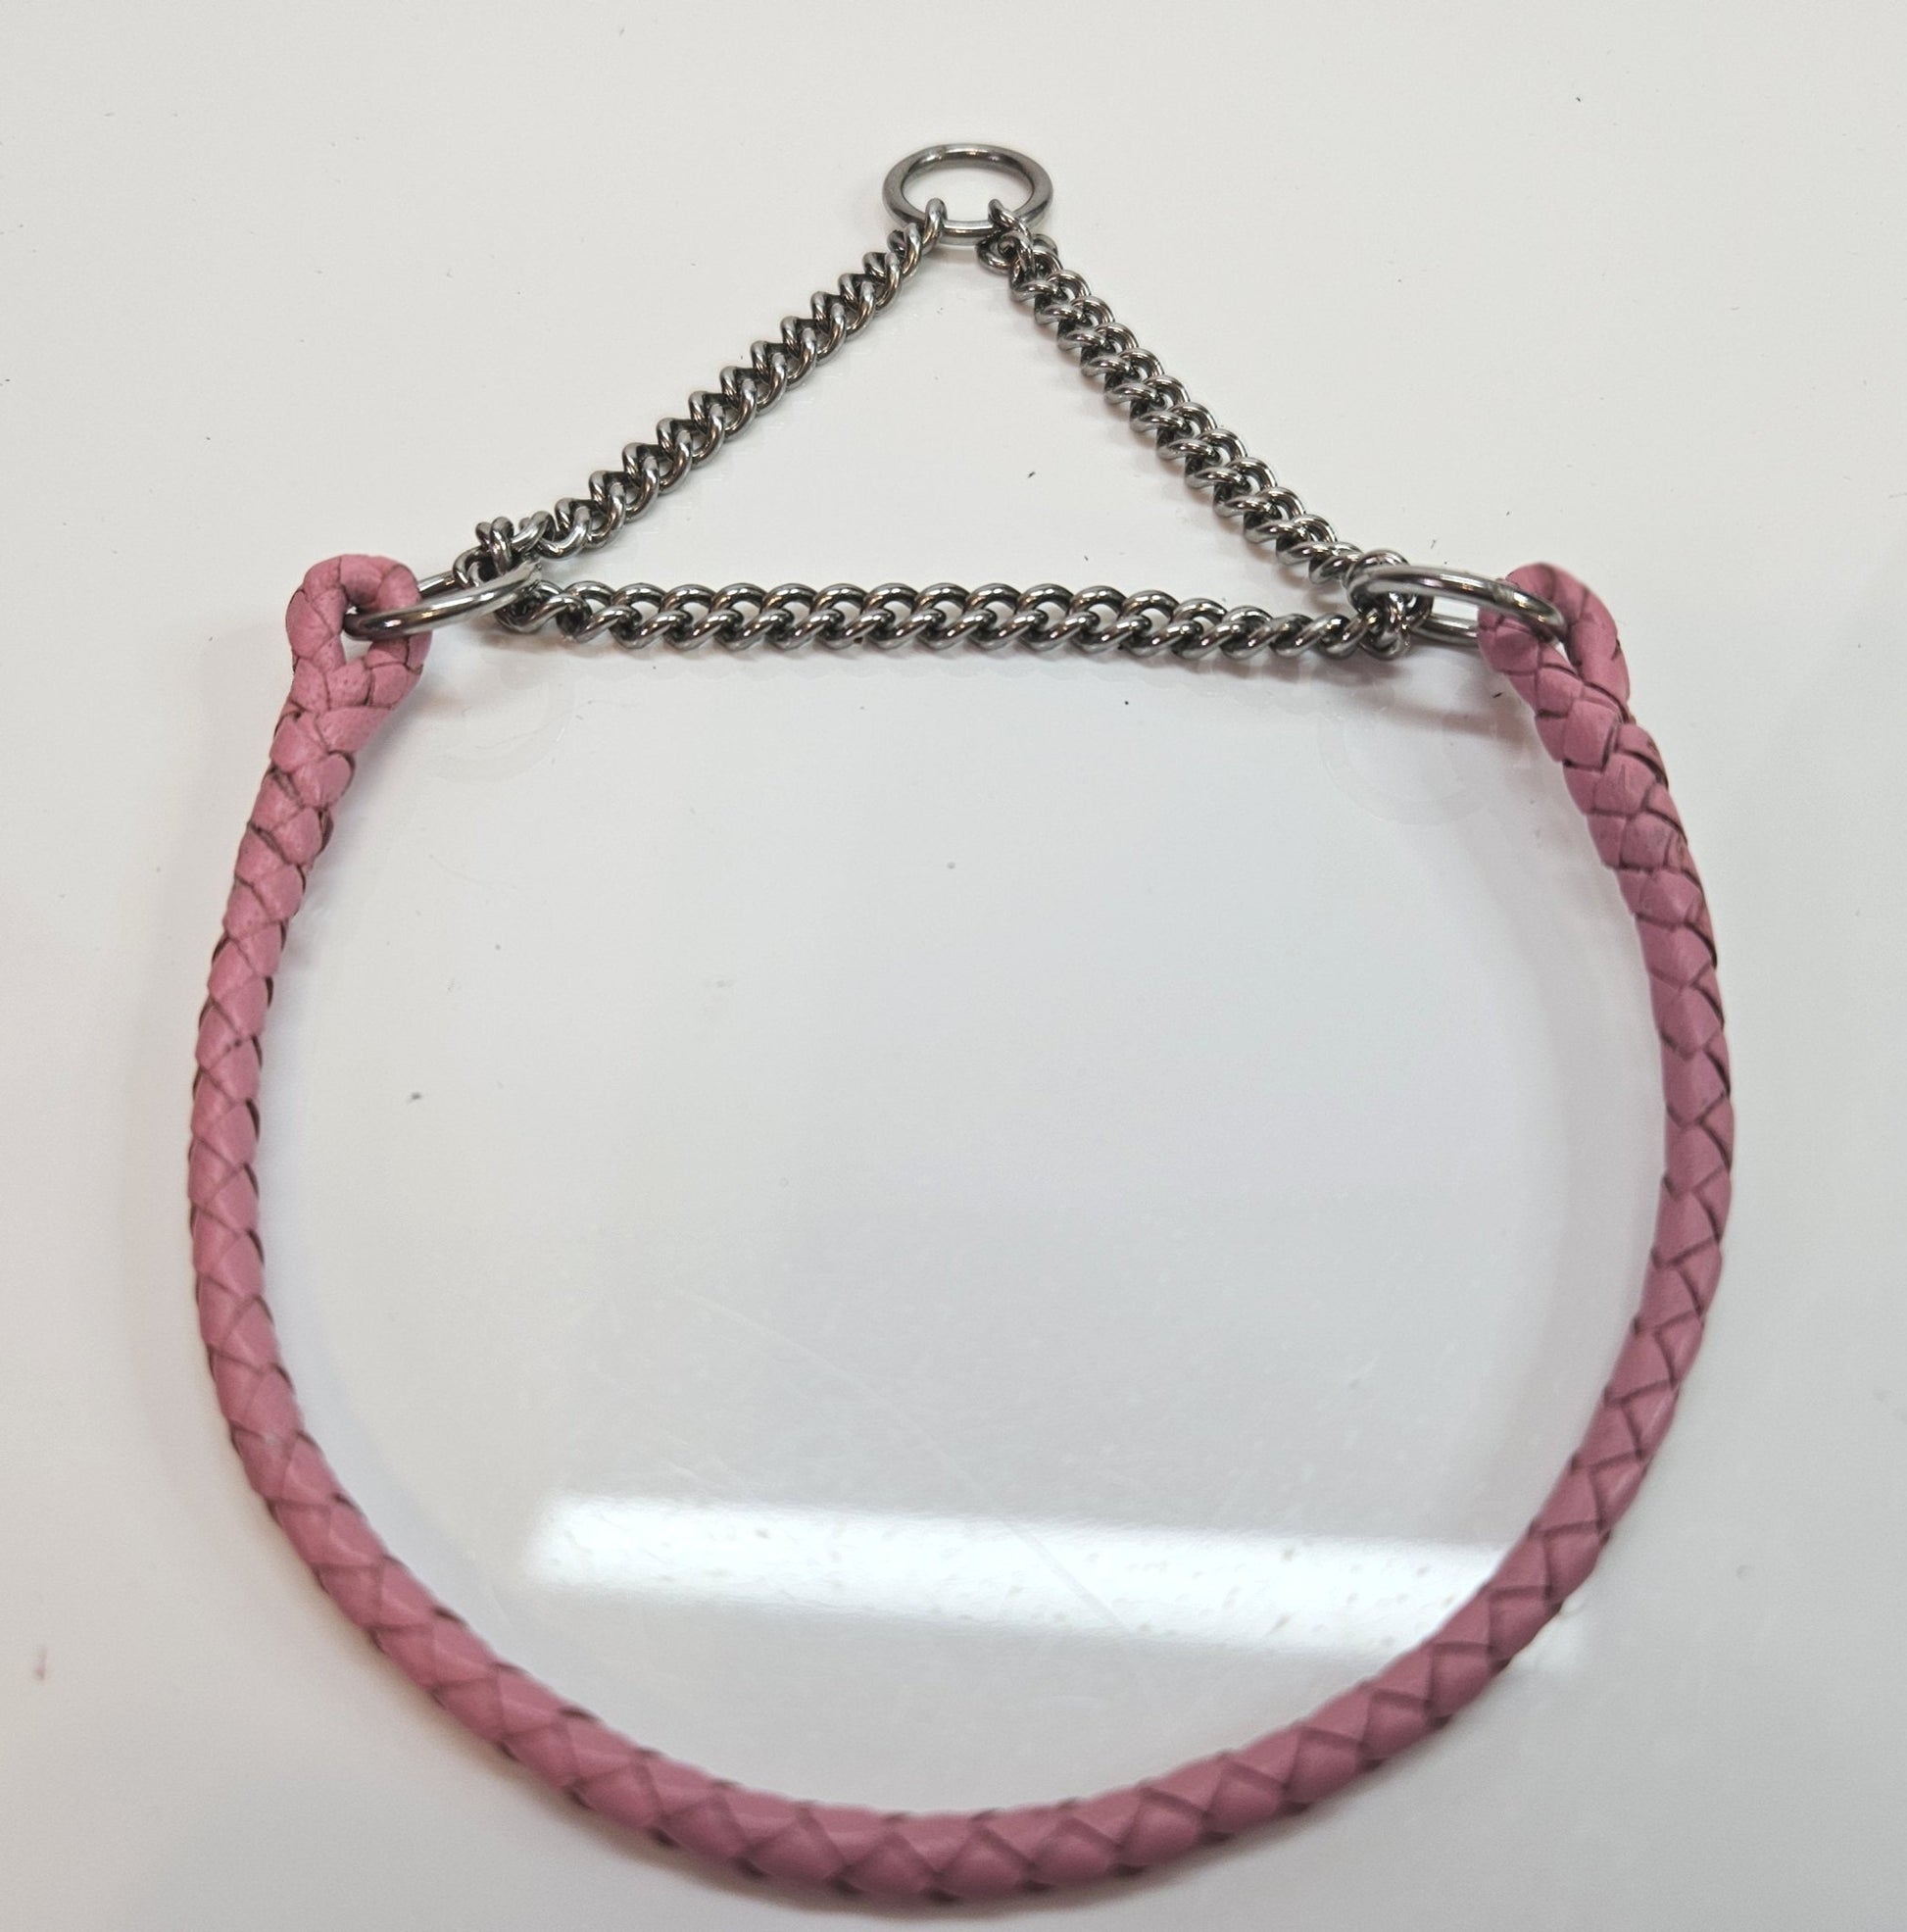 Premade Chain & Leather Martingale Show Collar - Champion Show Leads